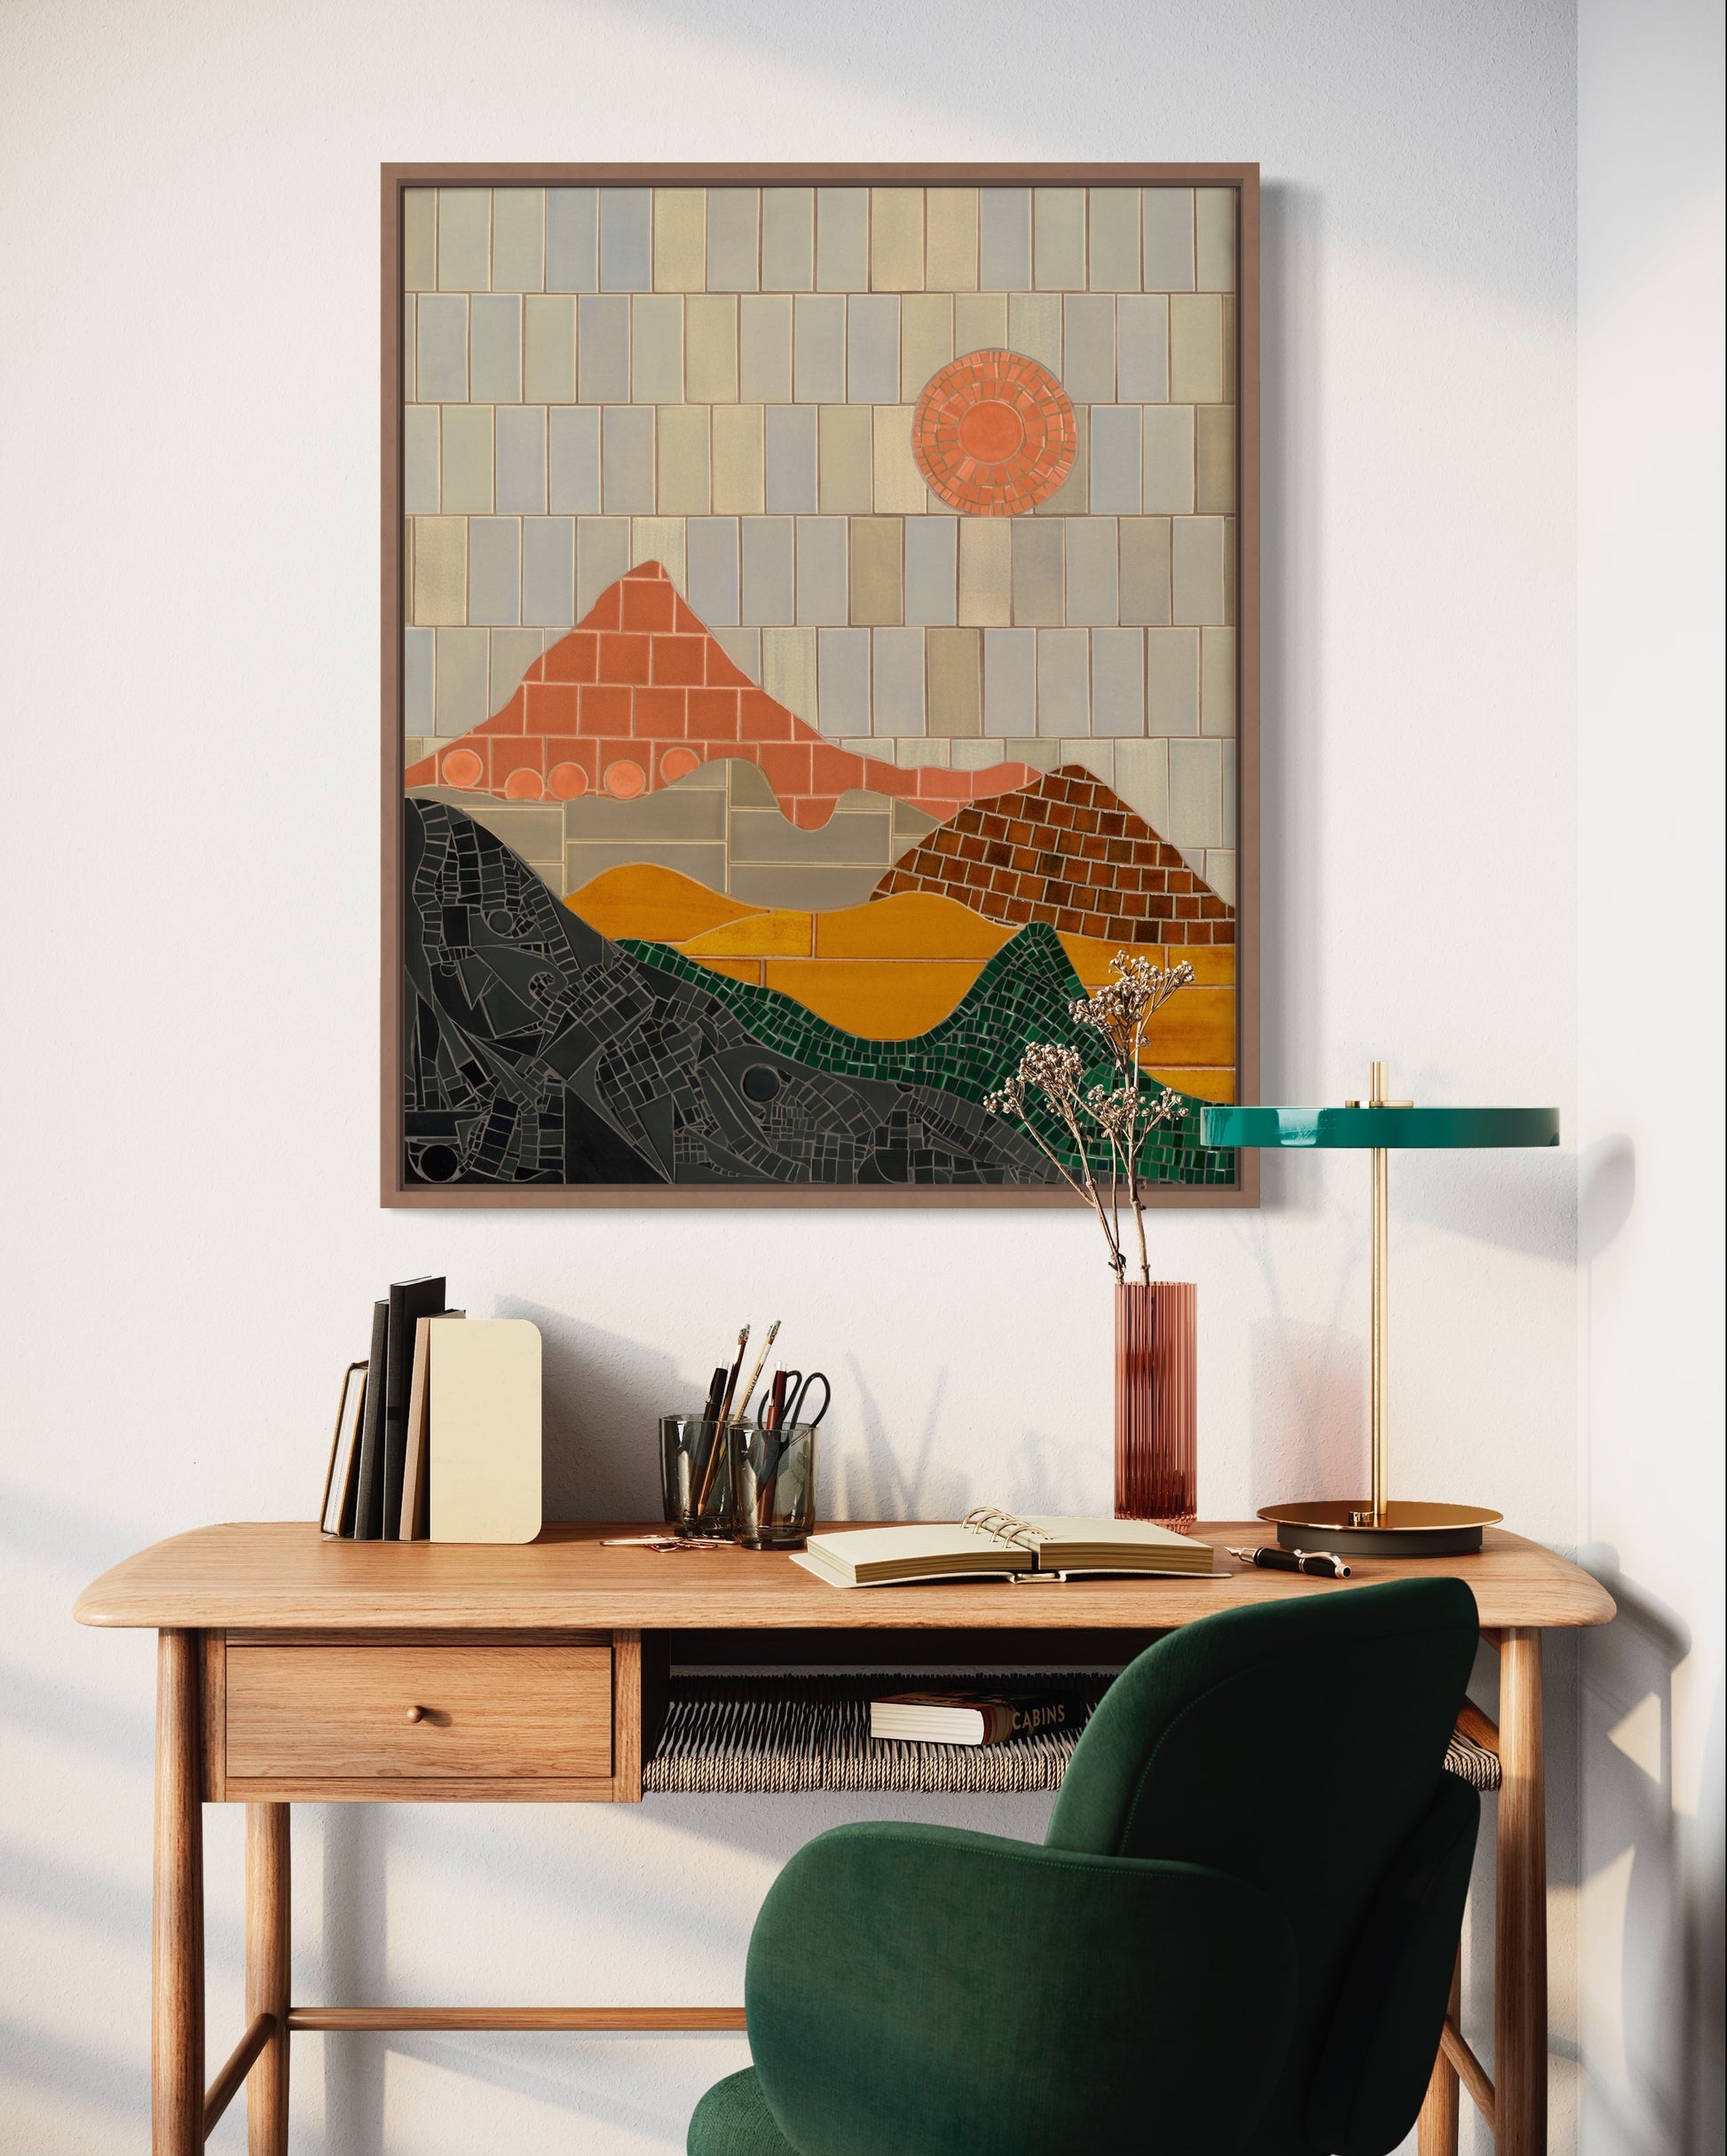 Dusty Sunstone Vista Mosaic Art in a frame, hanging in an office